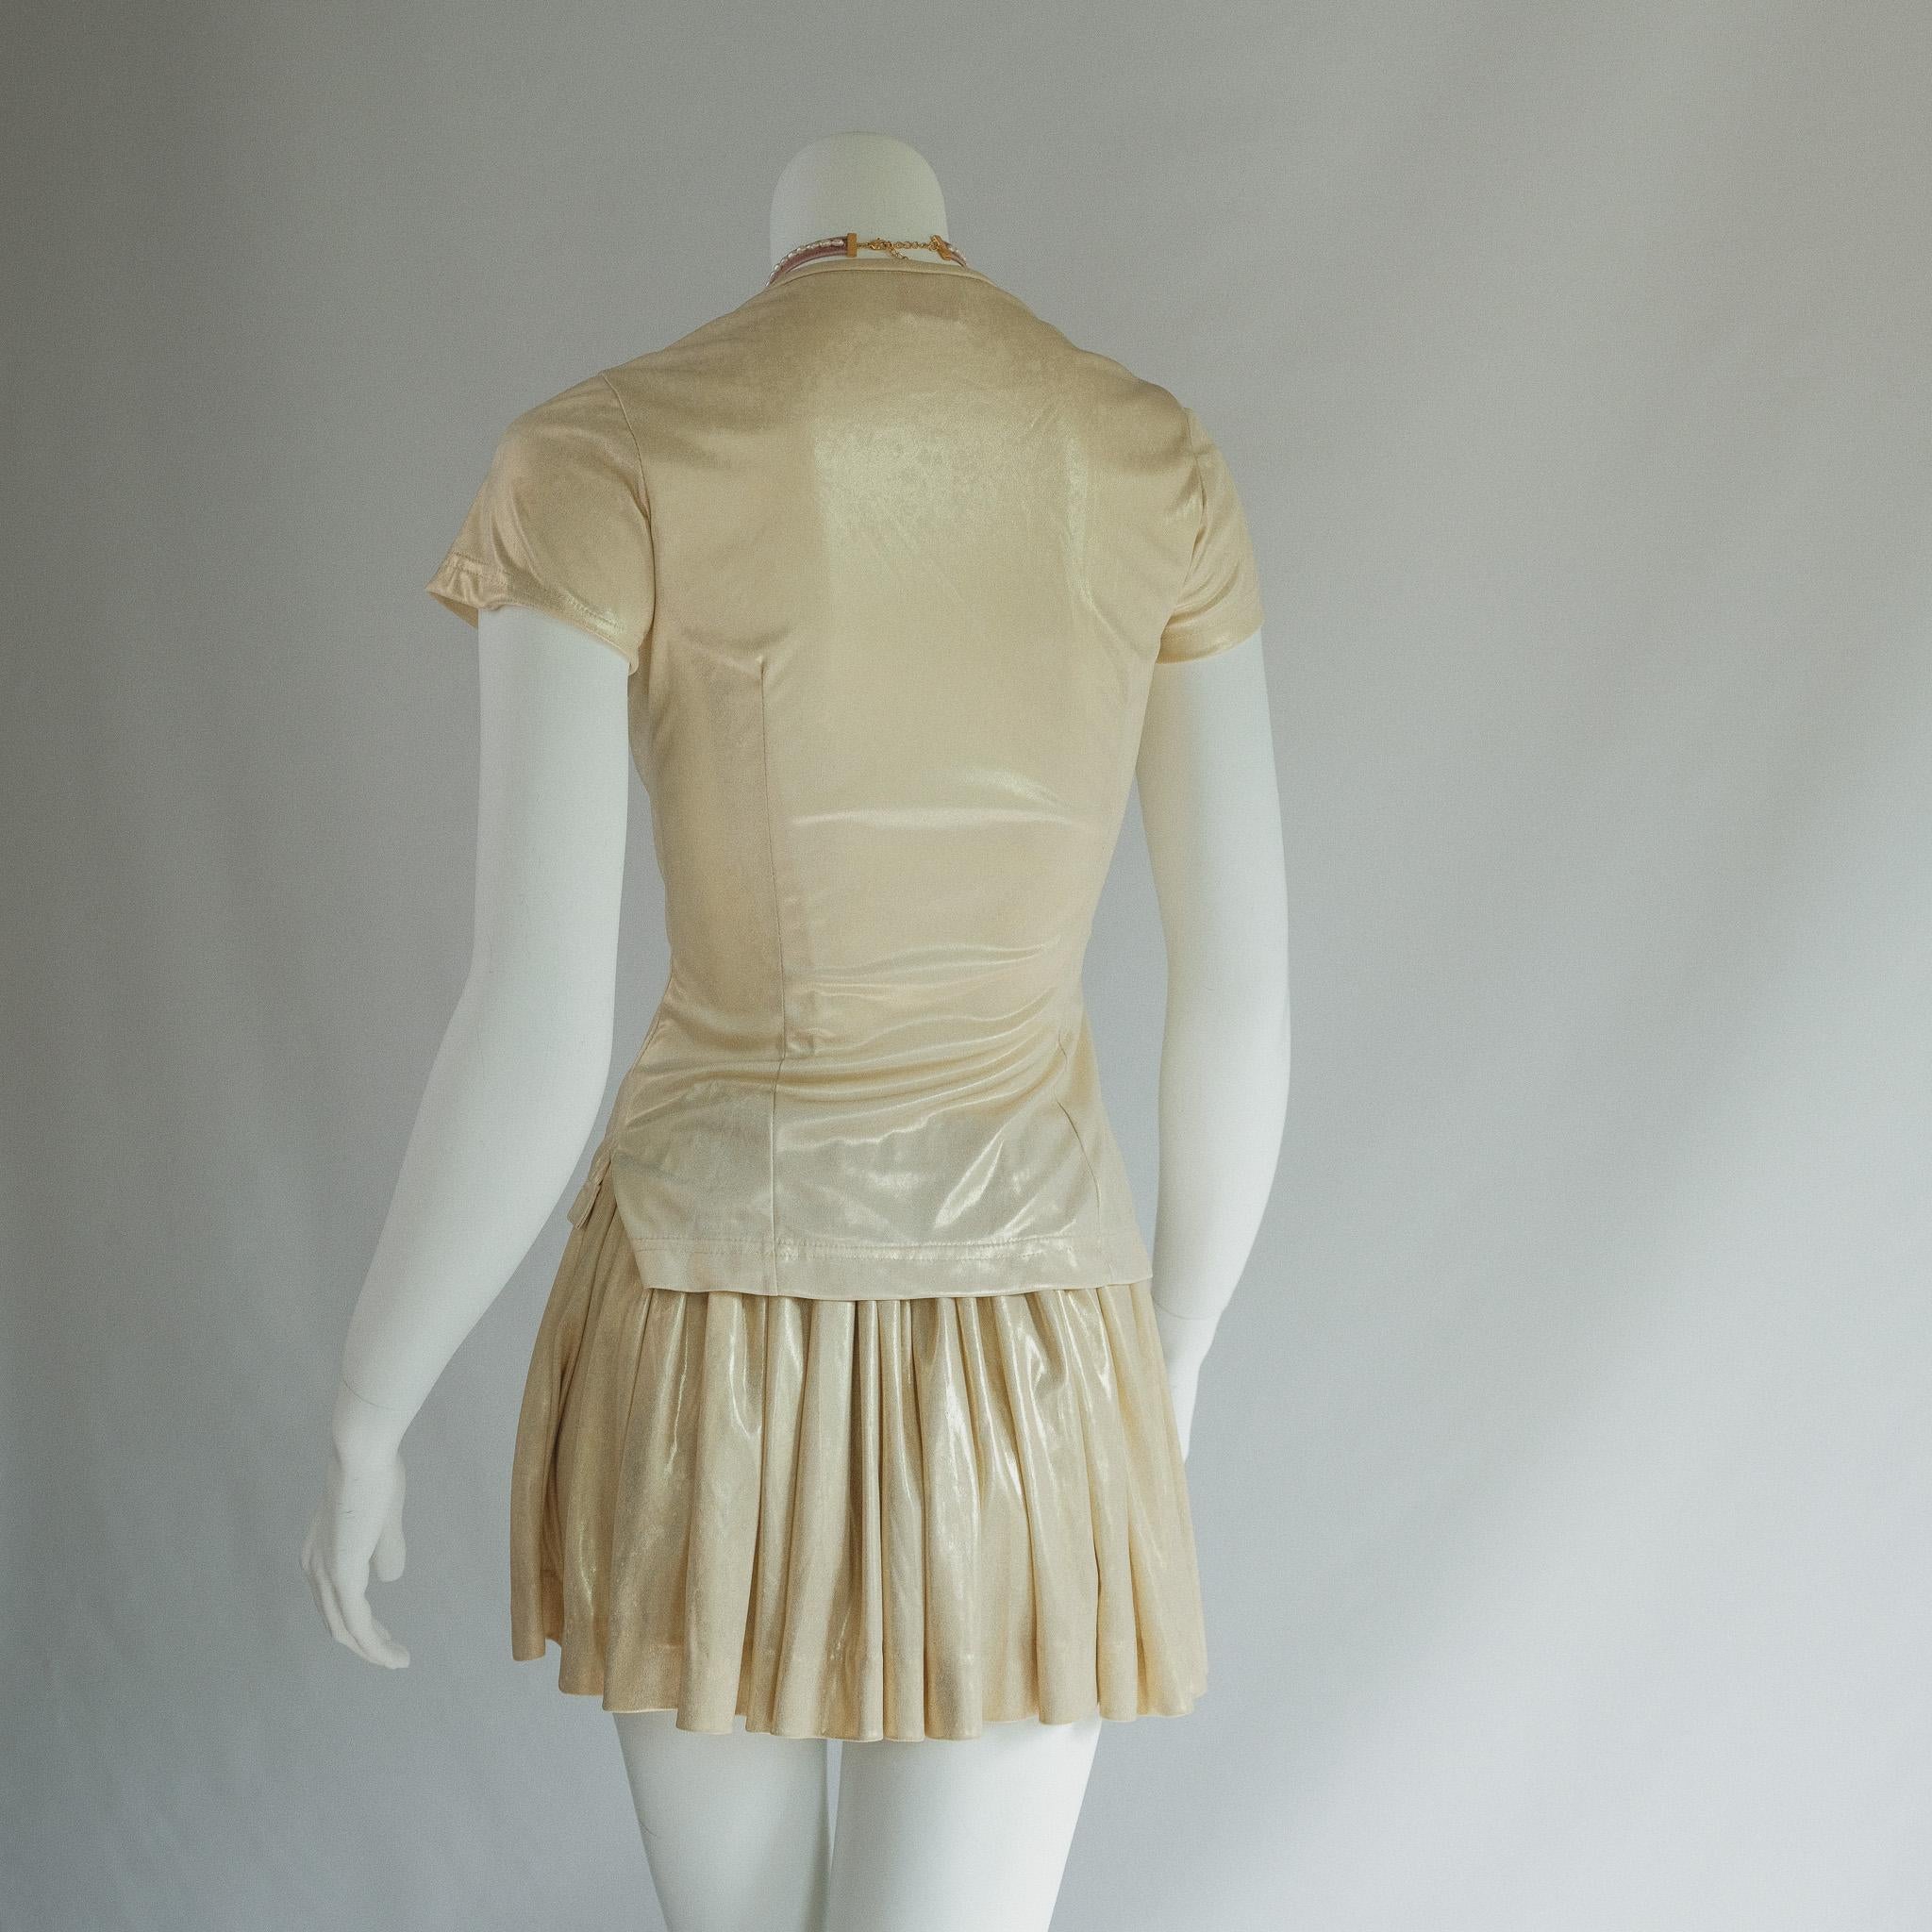 Vivienne Westwood 1988 SS Pagan Collection 80s Gold Mini Skirt Set XS 2